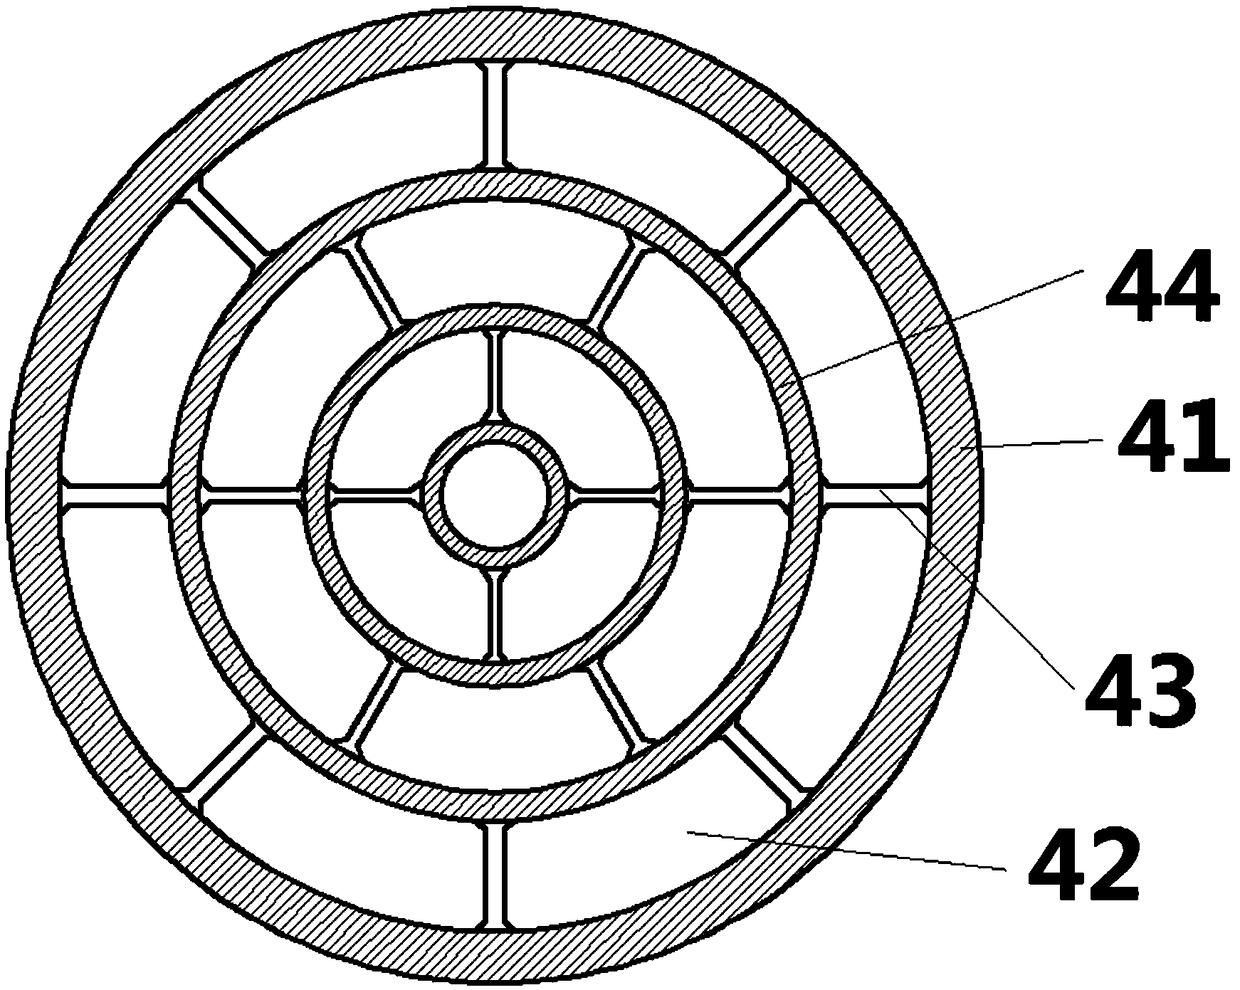 Loop Heat Pipe with Annular Divider with Varying Hydraulic Diameter